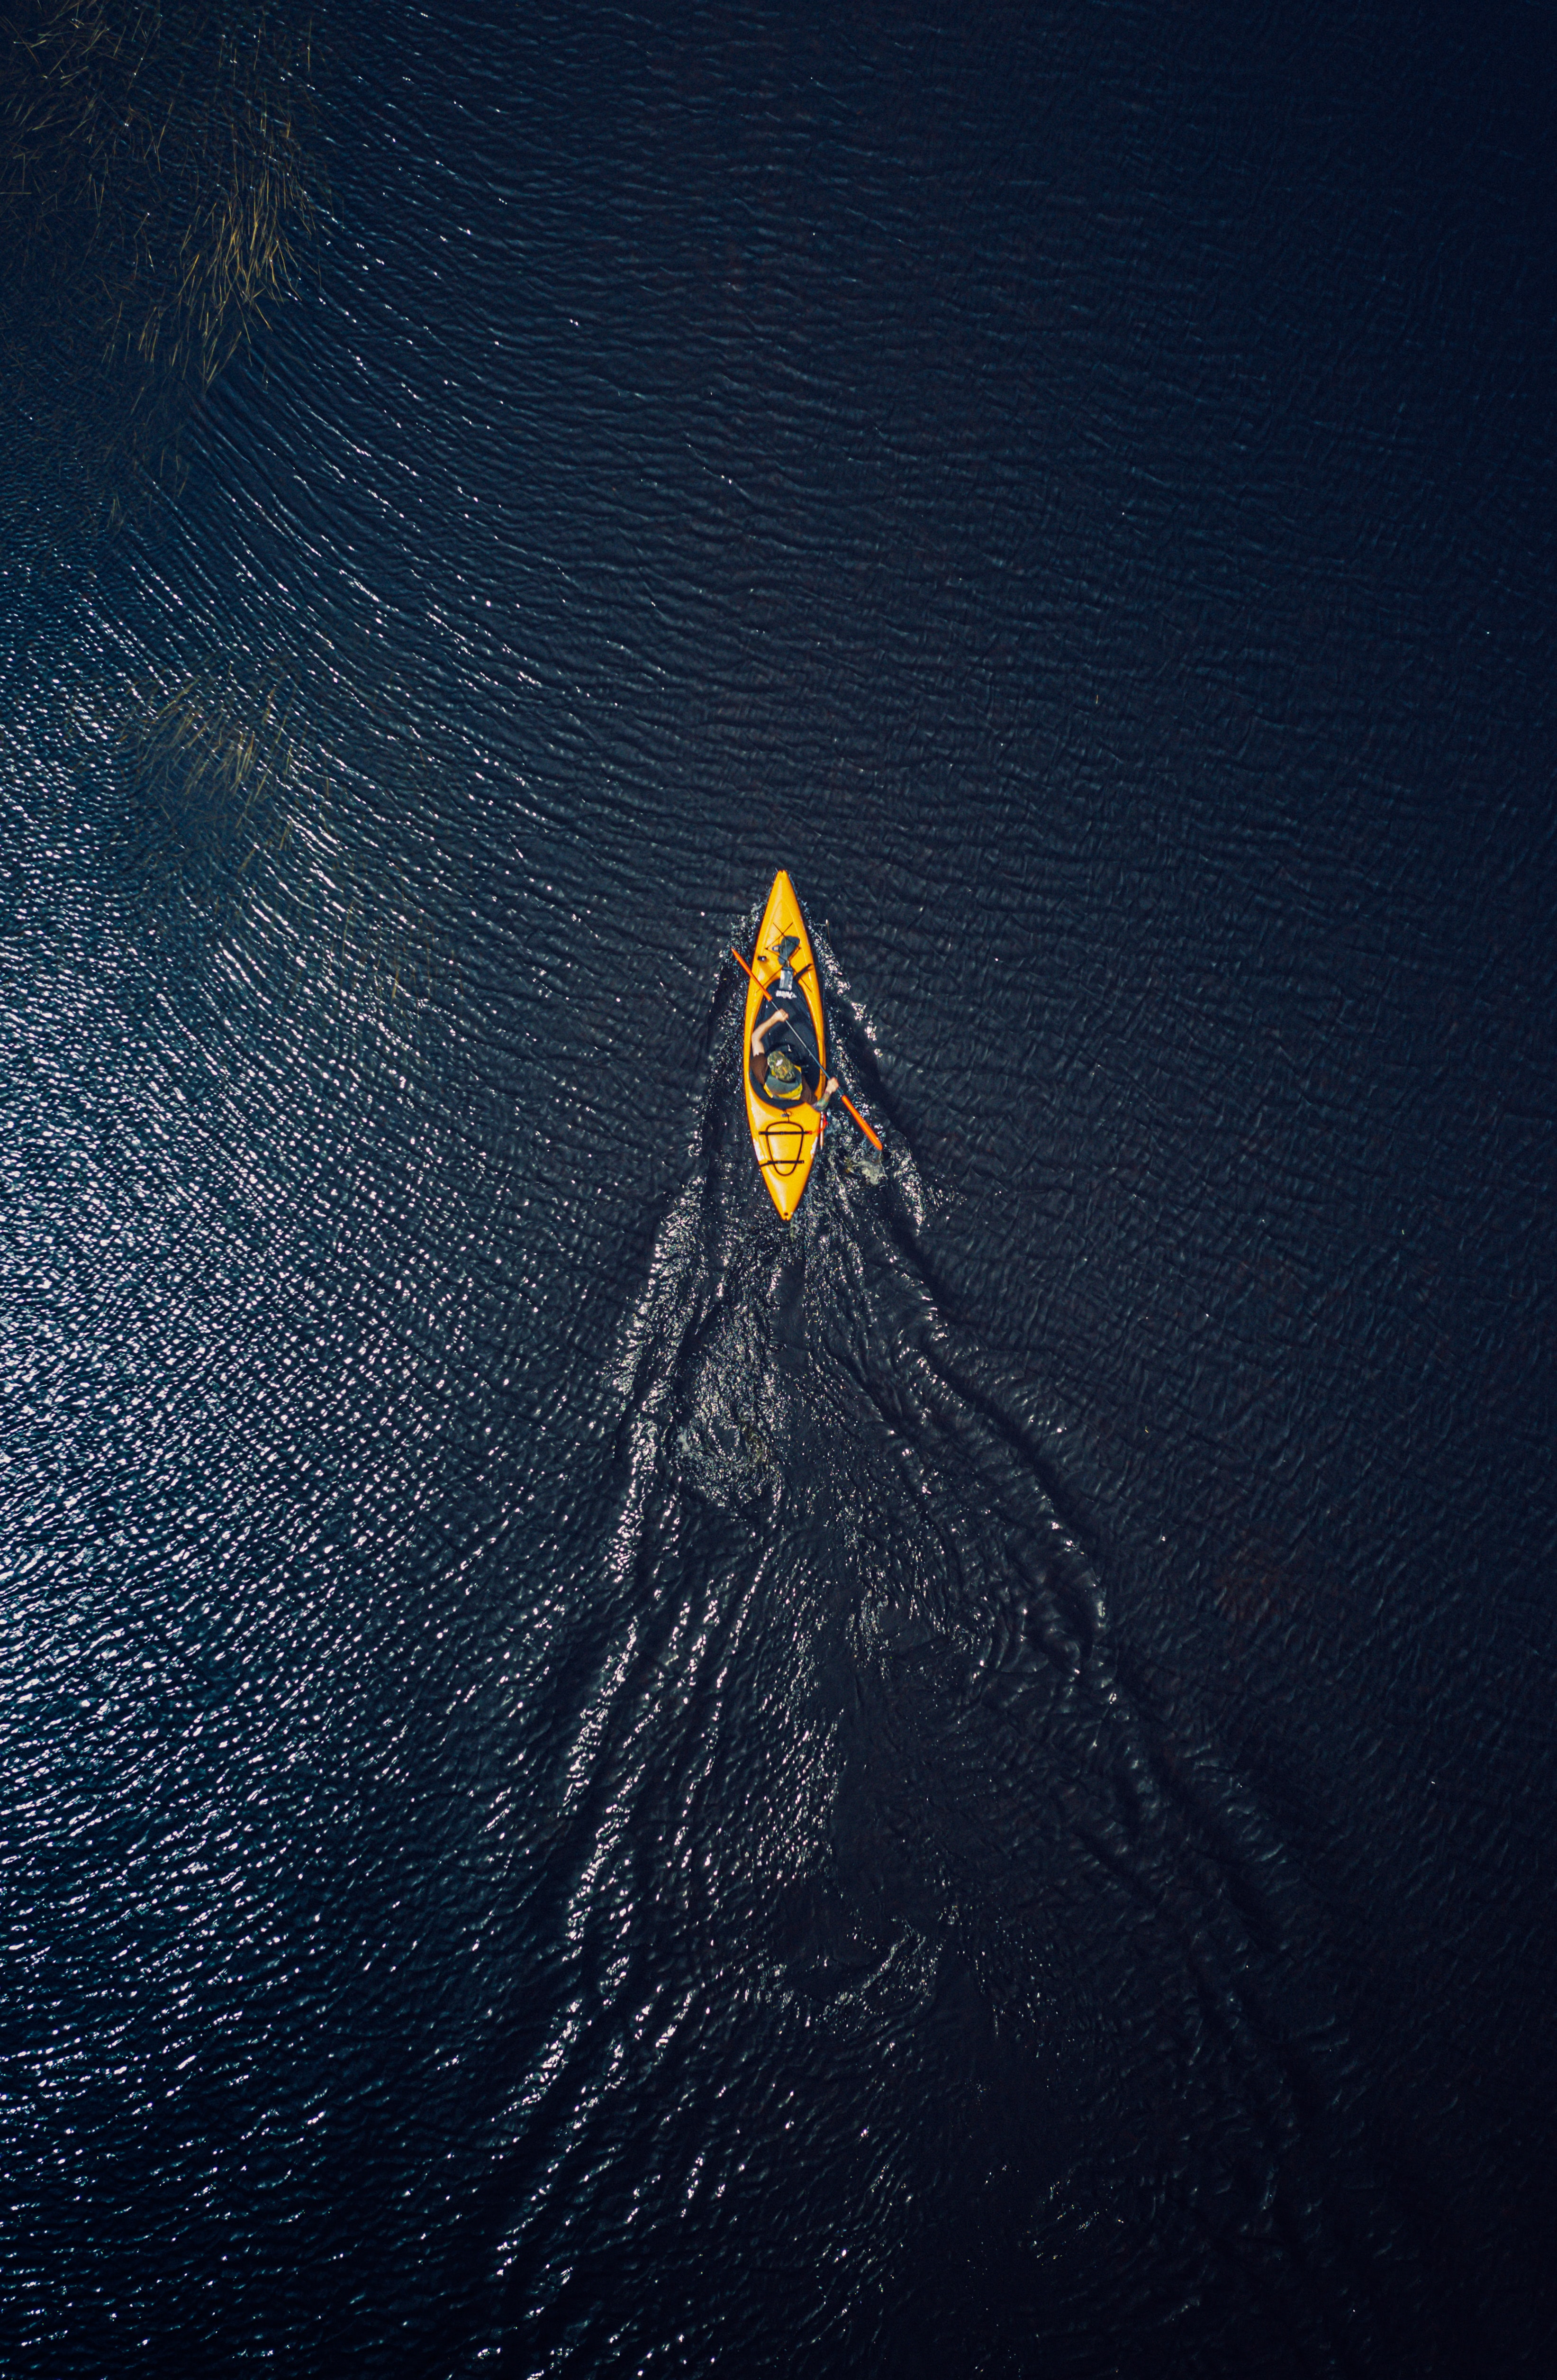 water, view from above, boat, miscellanea, miscellaneous, ocean, canoe